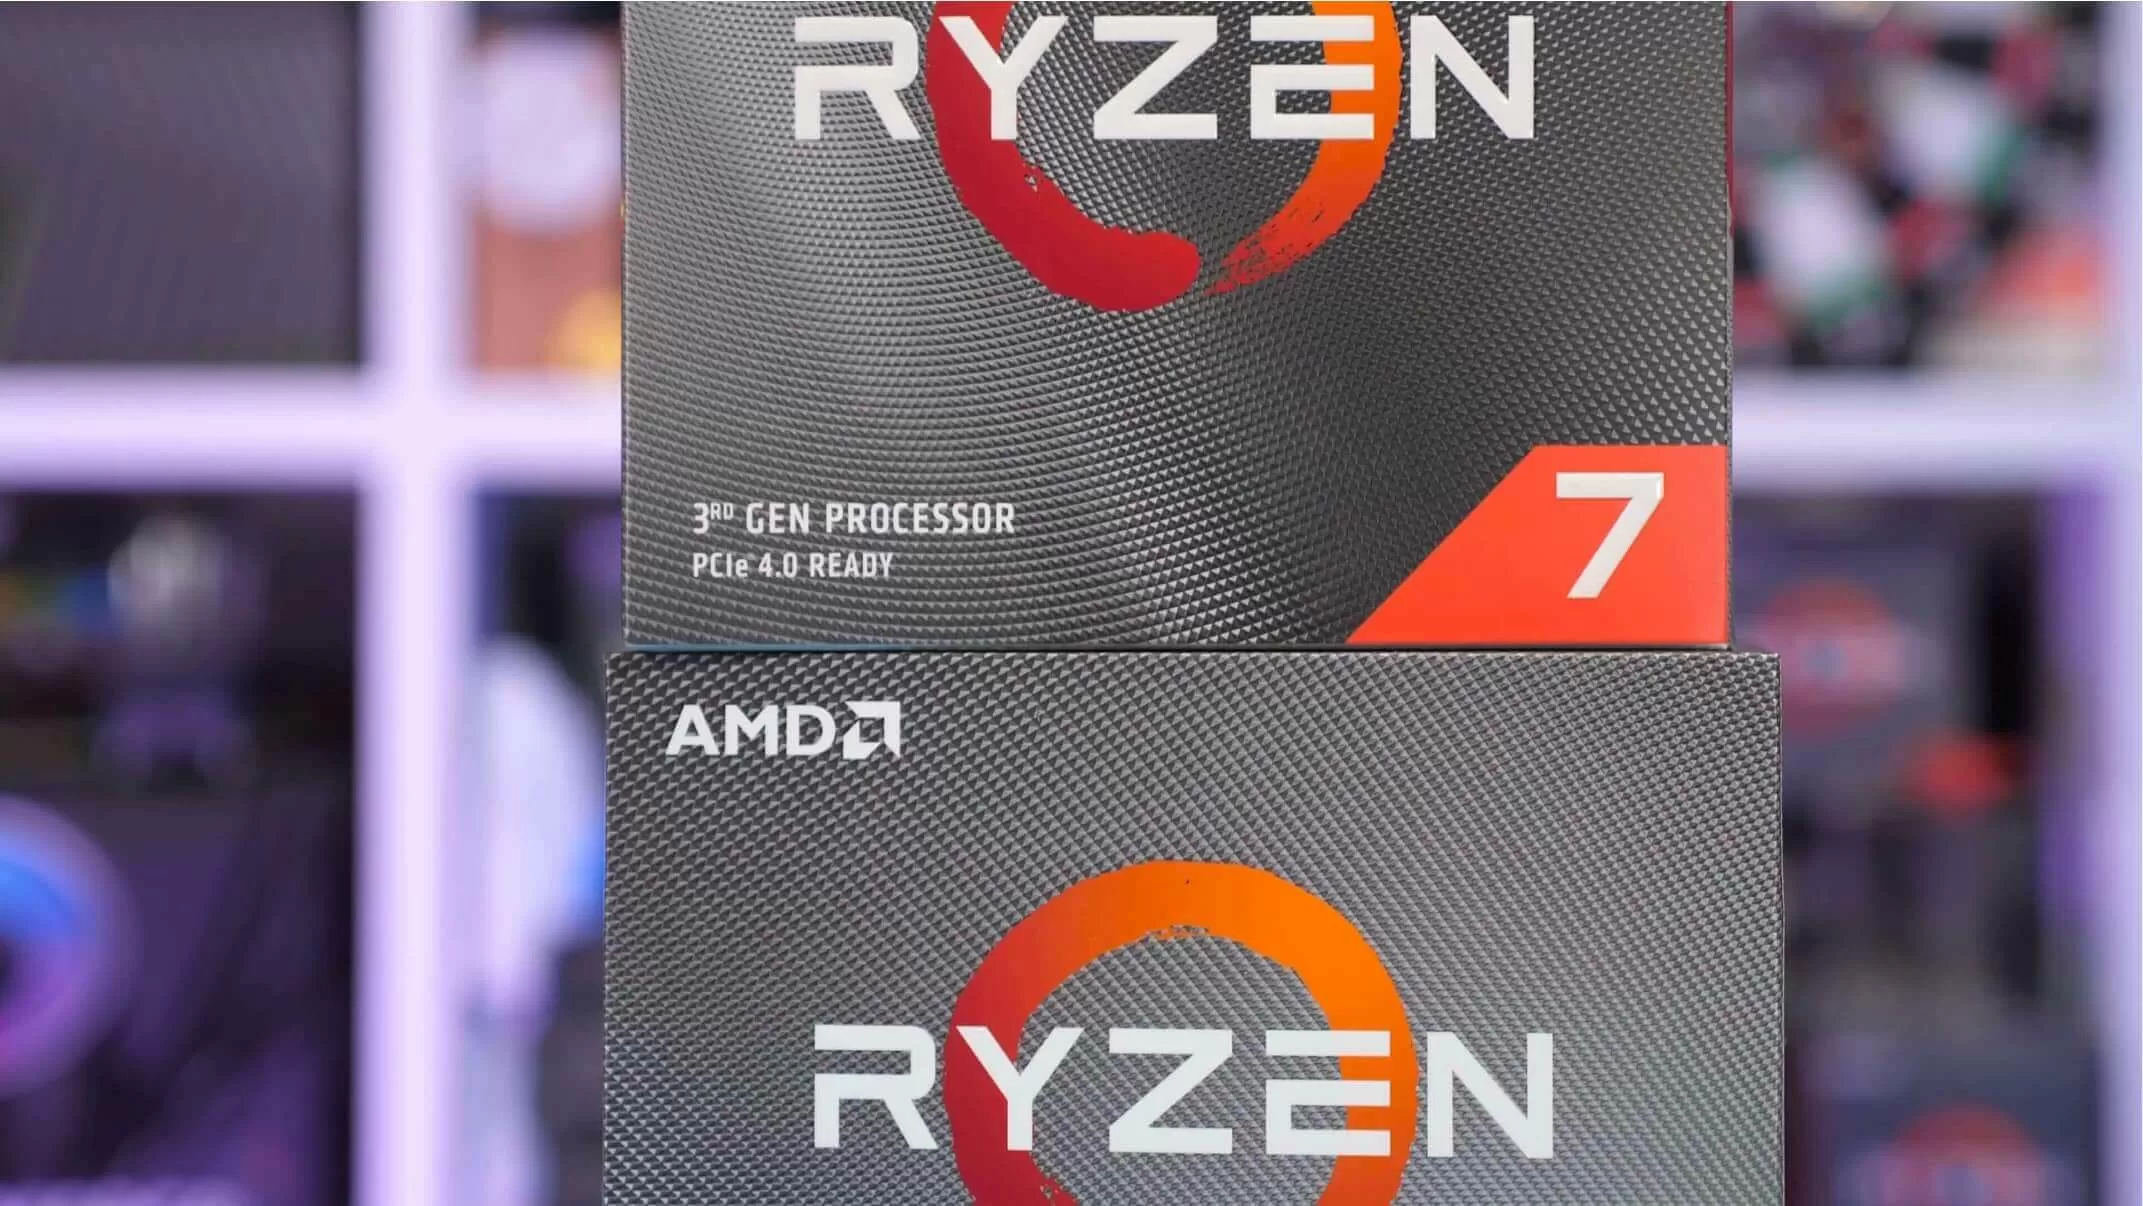 Consumer Zen 3 CPUs are launching this year, confirms AMD